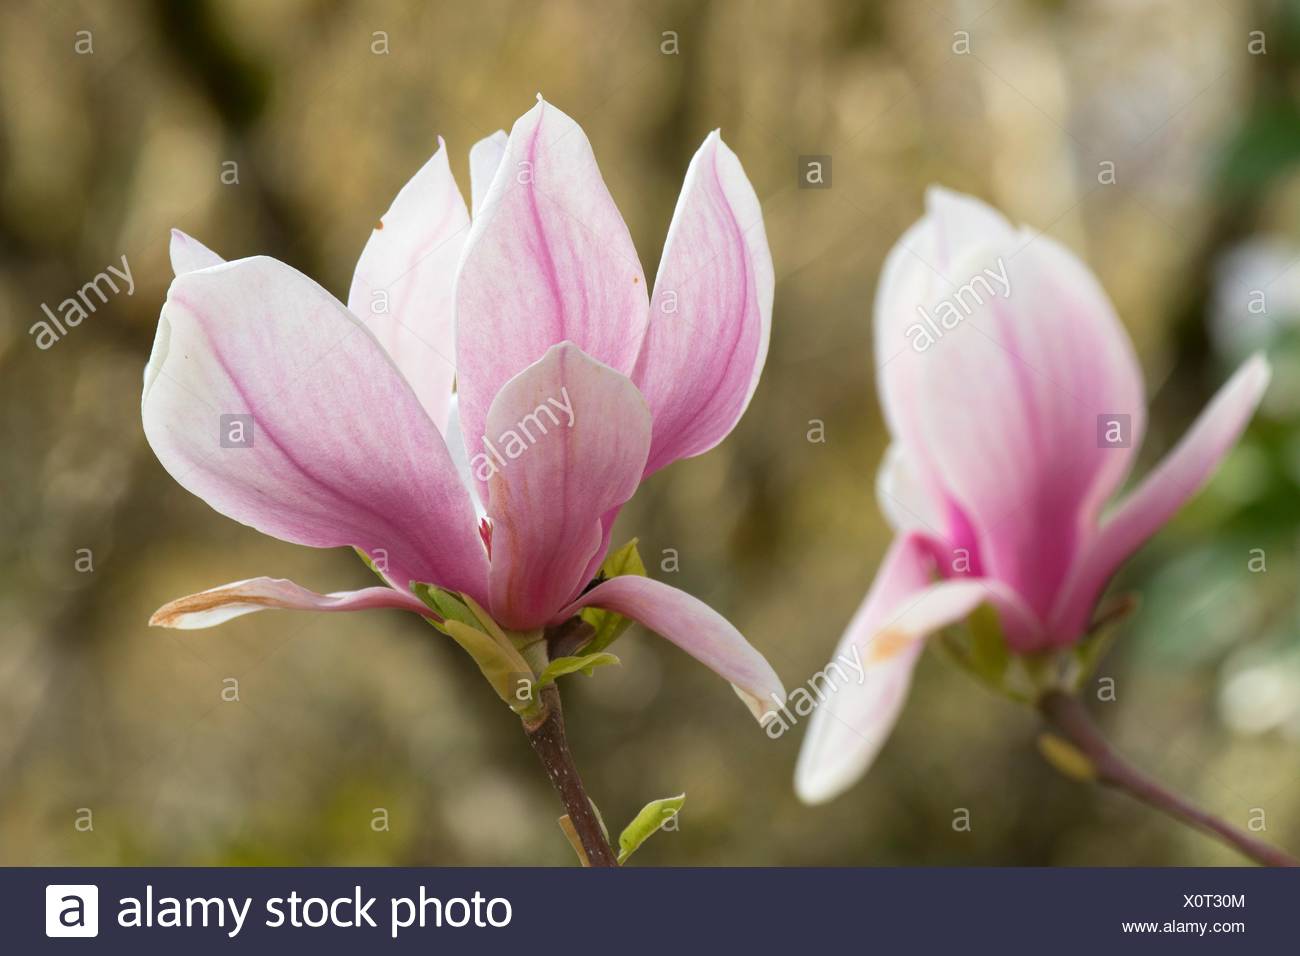 Tulip Tree High Resolution Stock Photography And Images Alamy,Grandmother Of The Bride Dresses